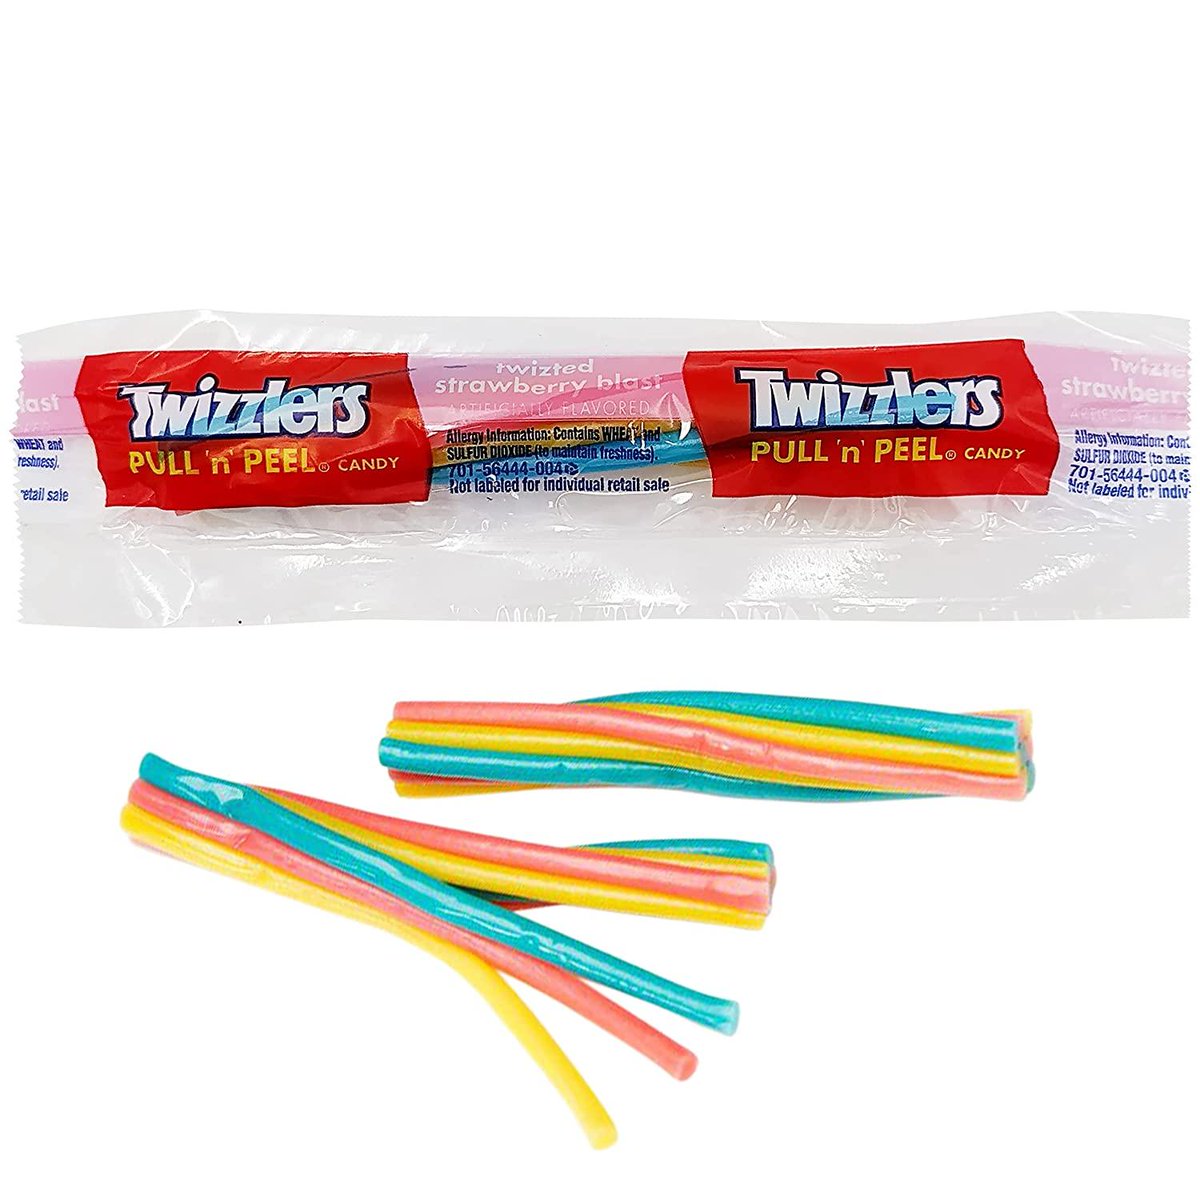 unhinged edible vs inedible dupes thread

do you want to eat electrical wires?
might i suggest twizzler pull n peels instead